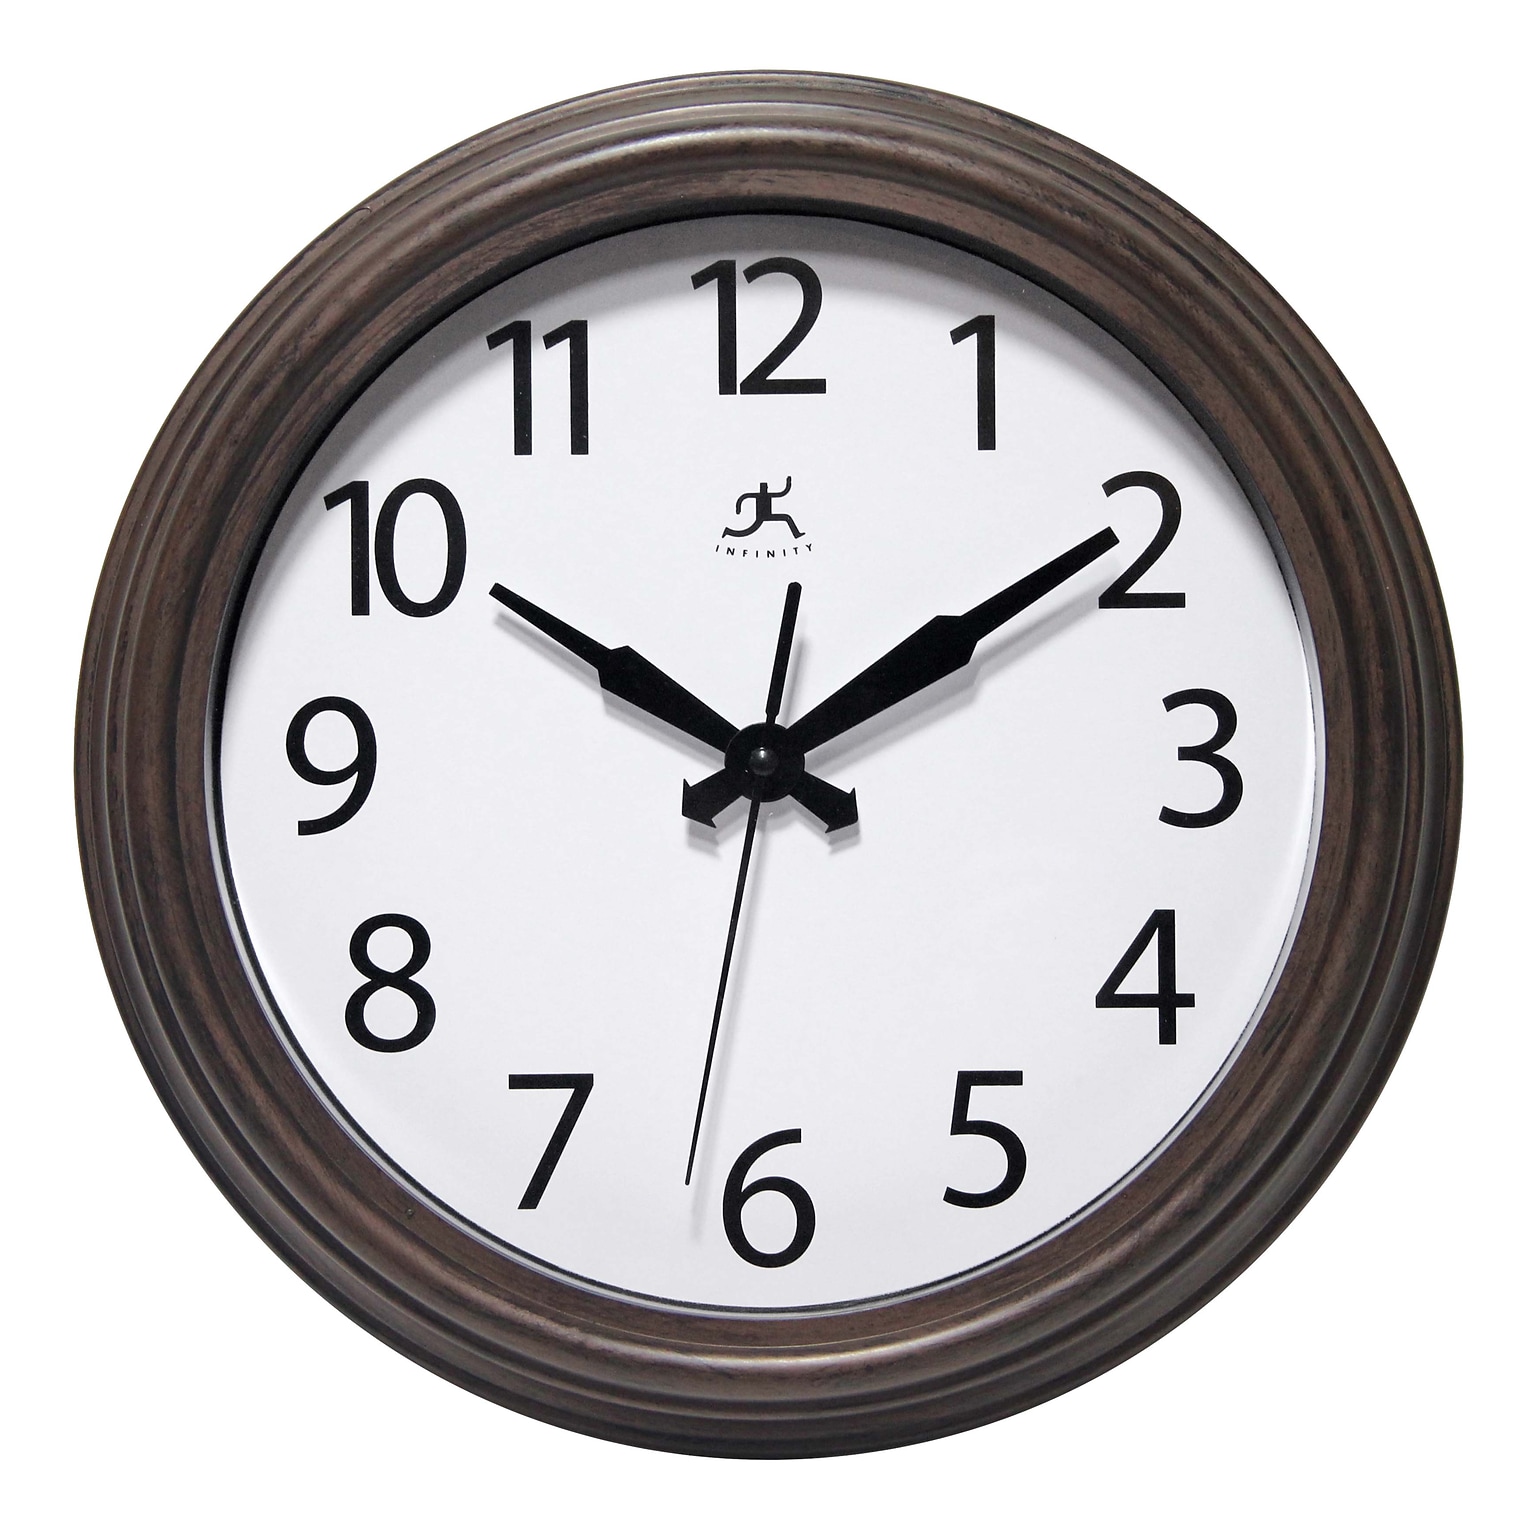 Infinity Instruments 12 Round Wall Clock, Antique Brown Finish Case  (15355WL-4255)